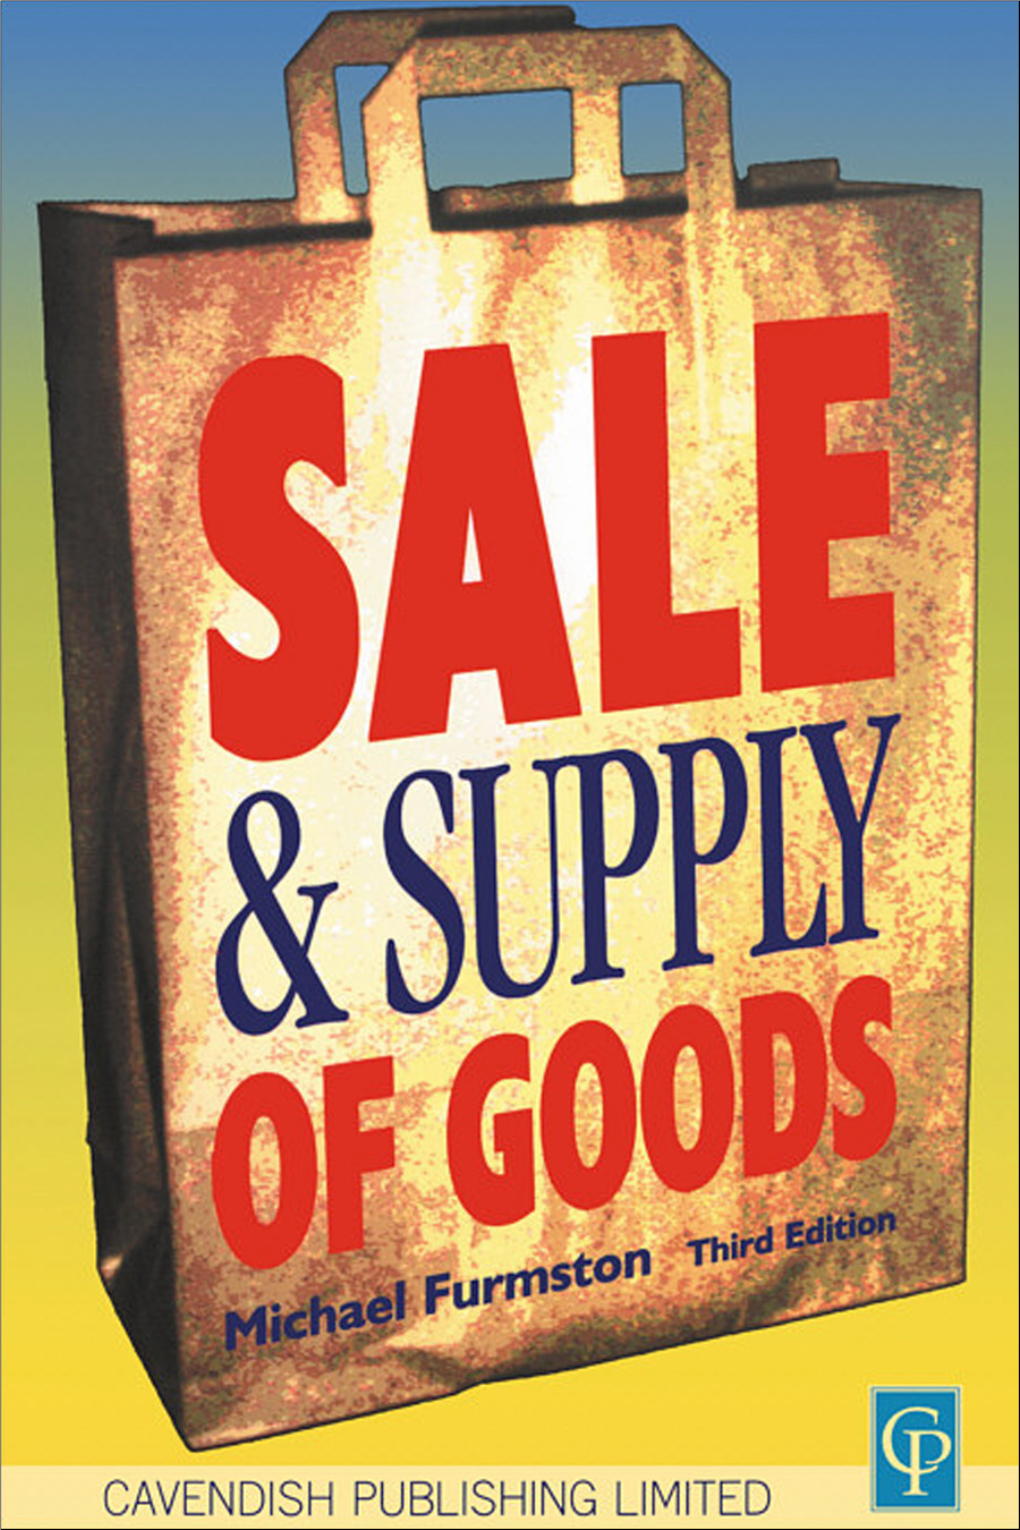 Sale and Supply of Goods, Third Edition